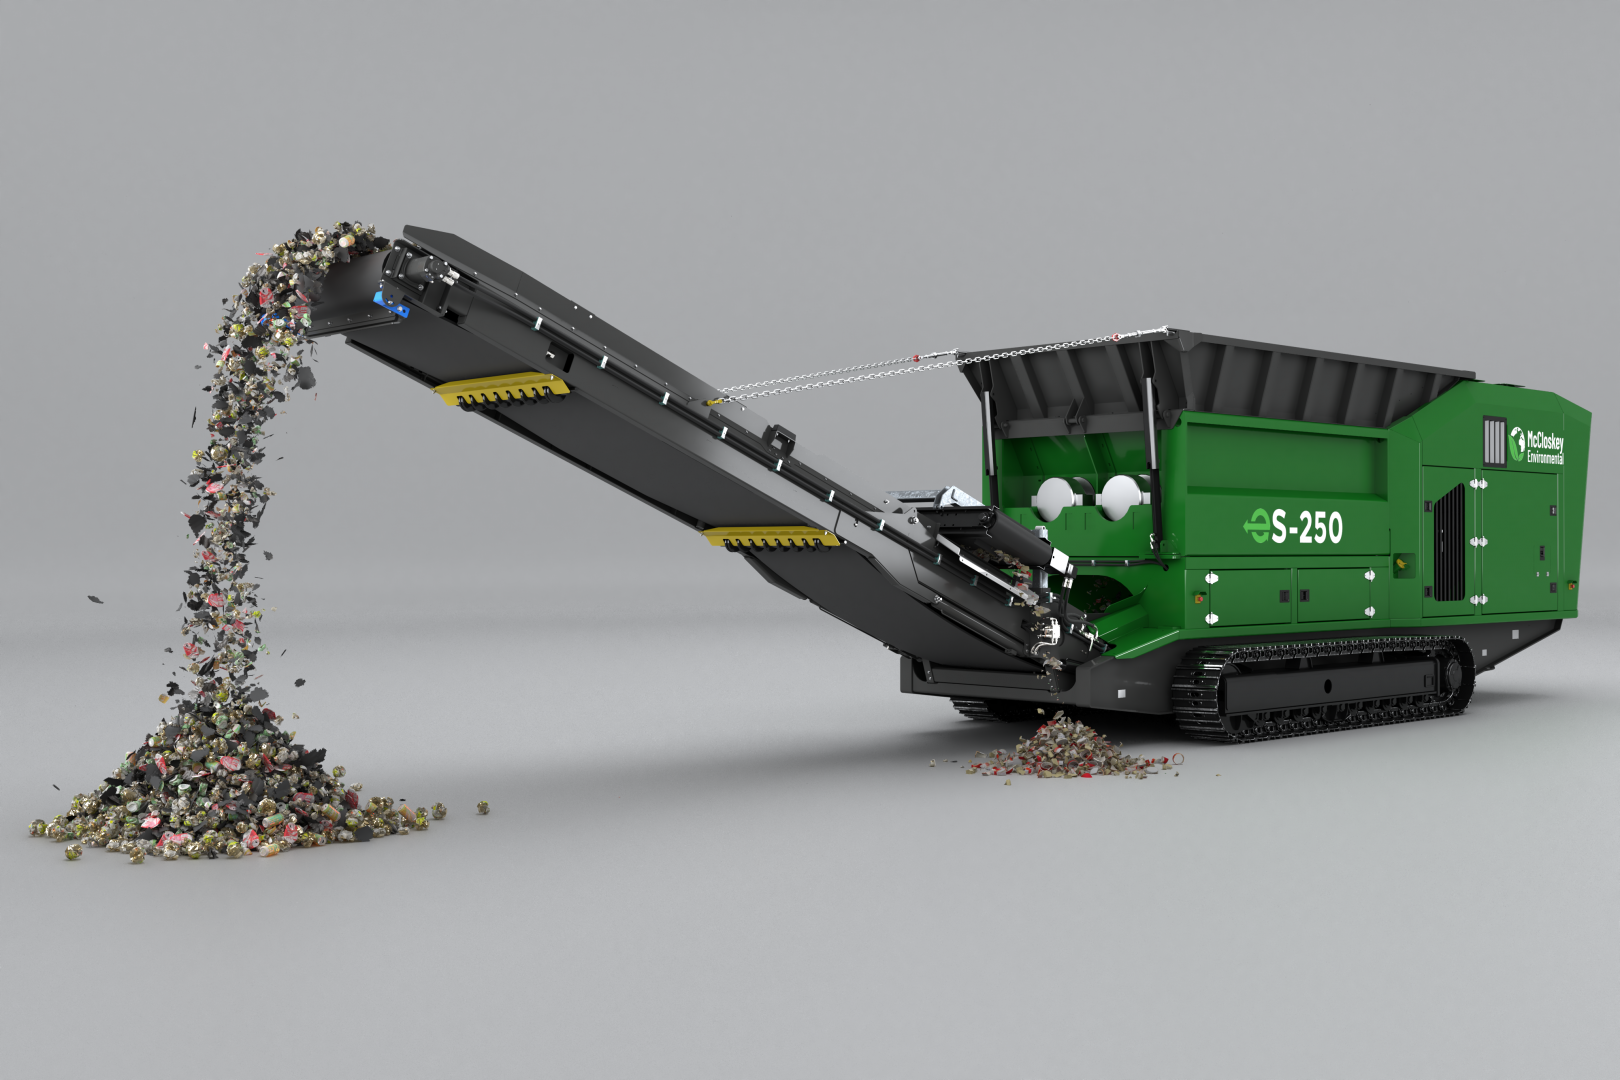 Product photo of McCloskey Environmental-branded recycling equipment.